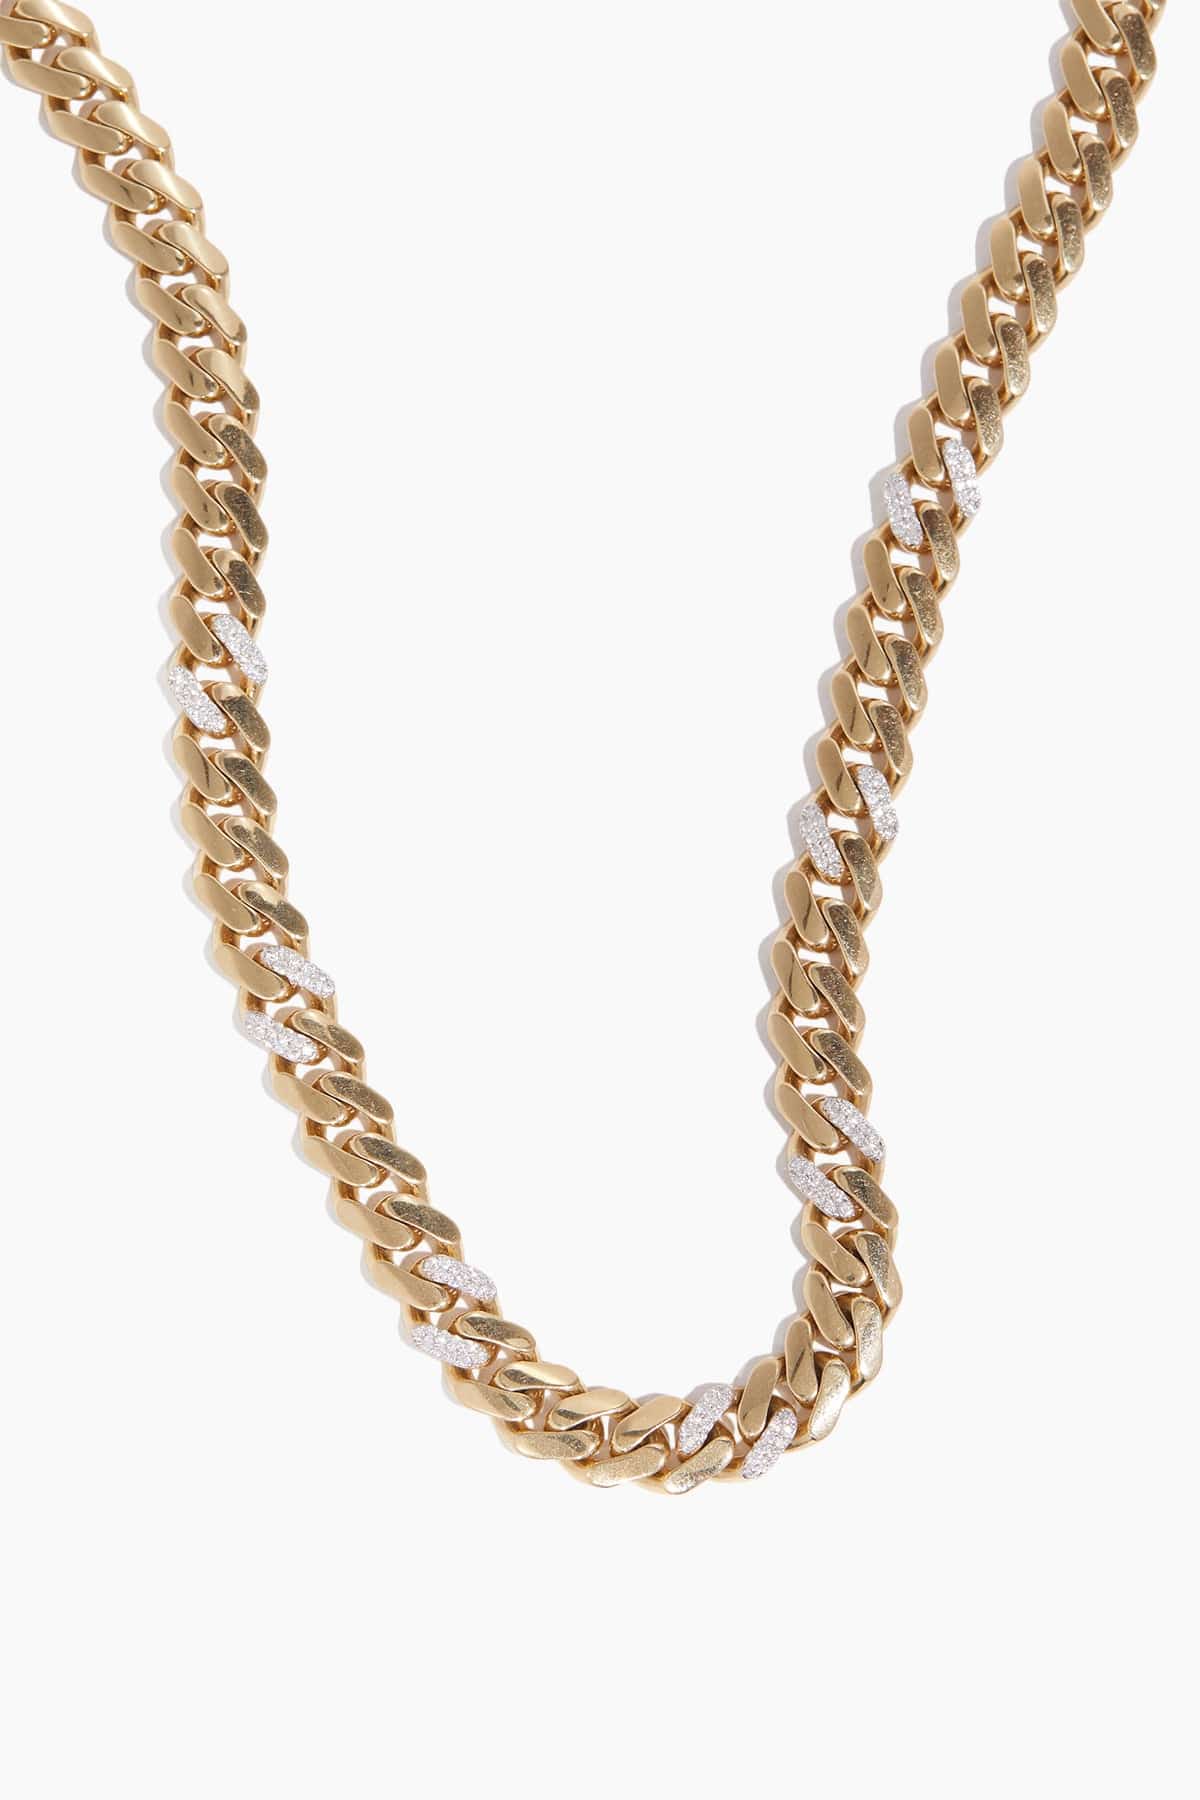 Stoned Jewelry Bracelets Miami Vice Cuban Link Chain in 14k Yellow Gold